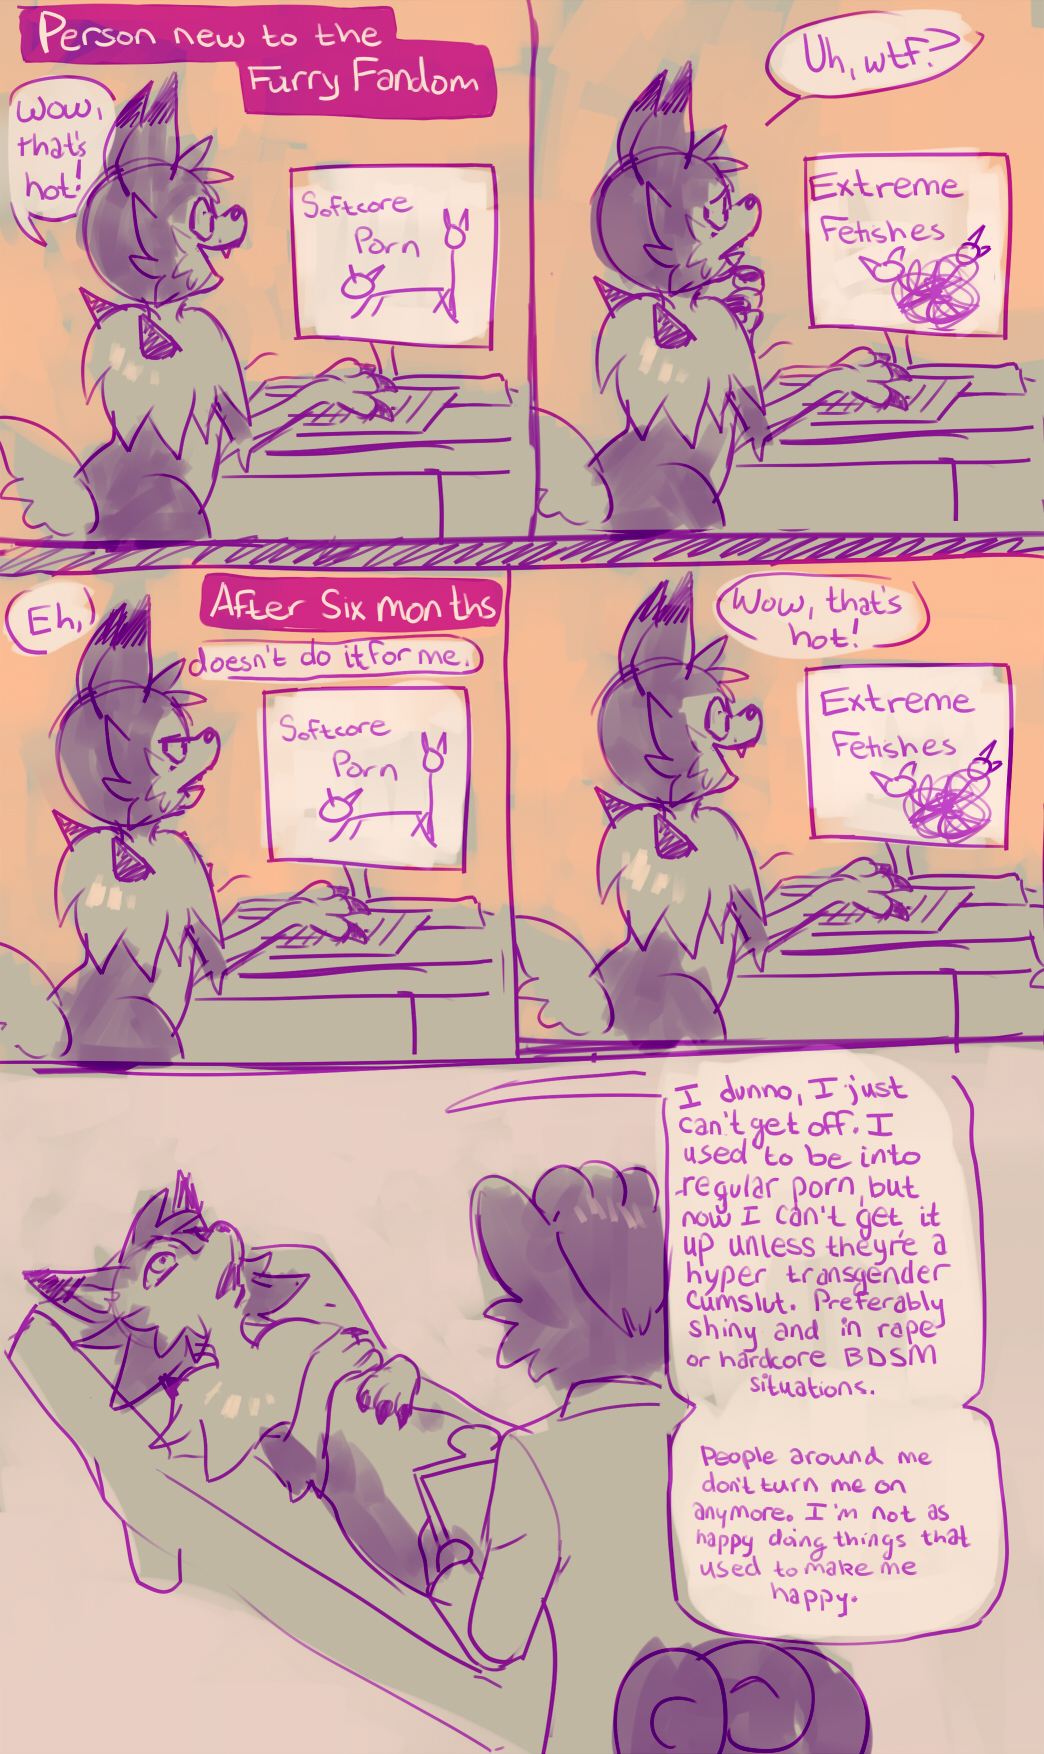 Mindes Porn Addiction by GrimArtu003c Submission Inkbunny, the Furry Art Community